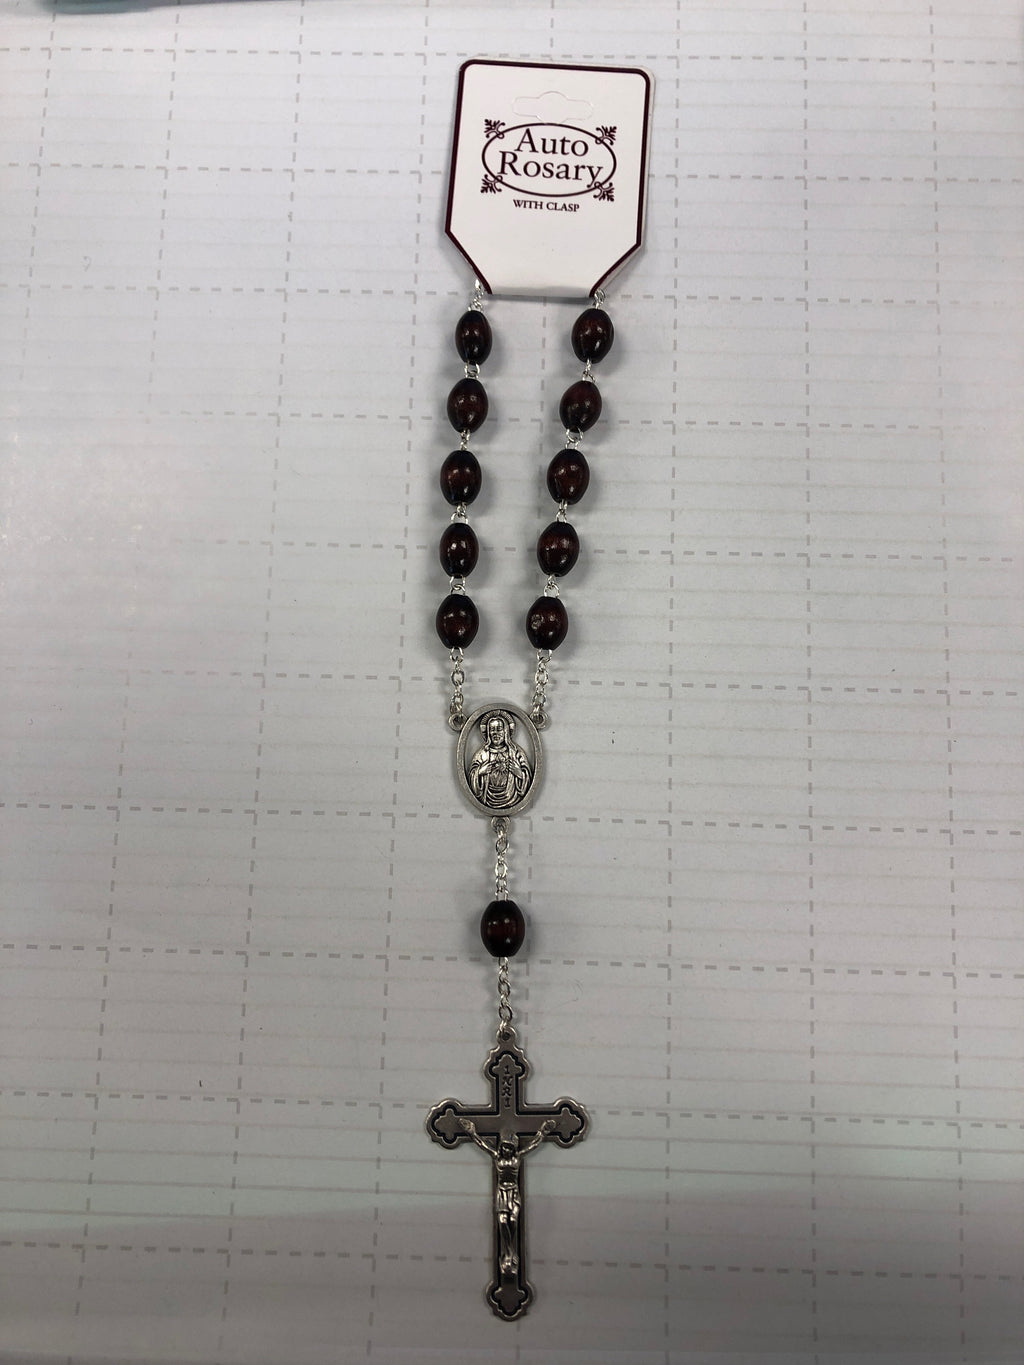 Auto rosary brown wood